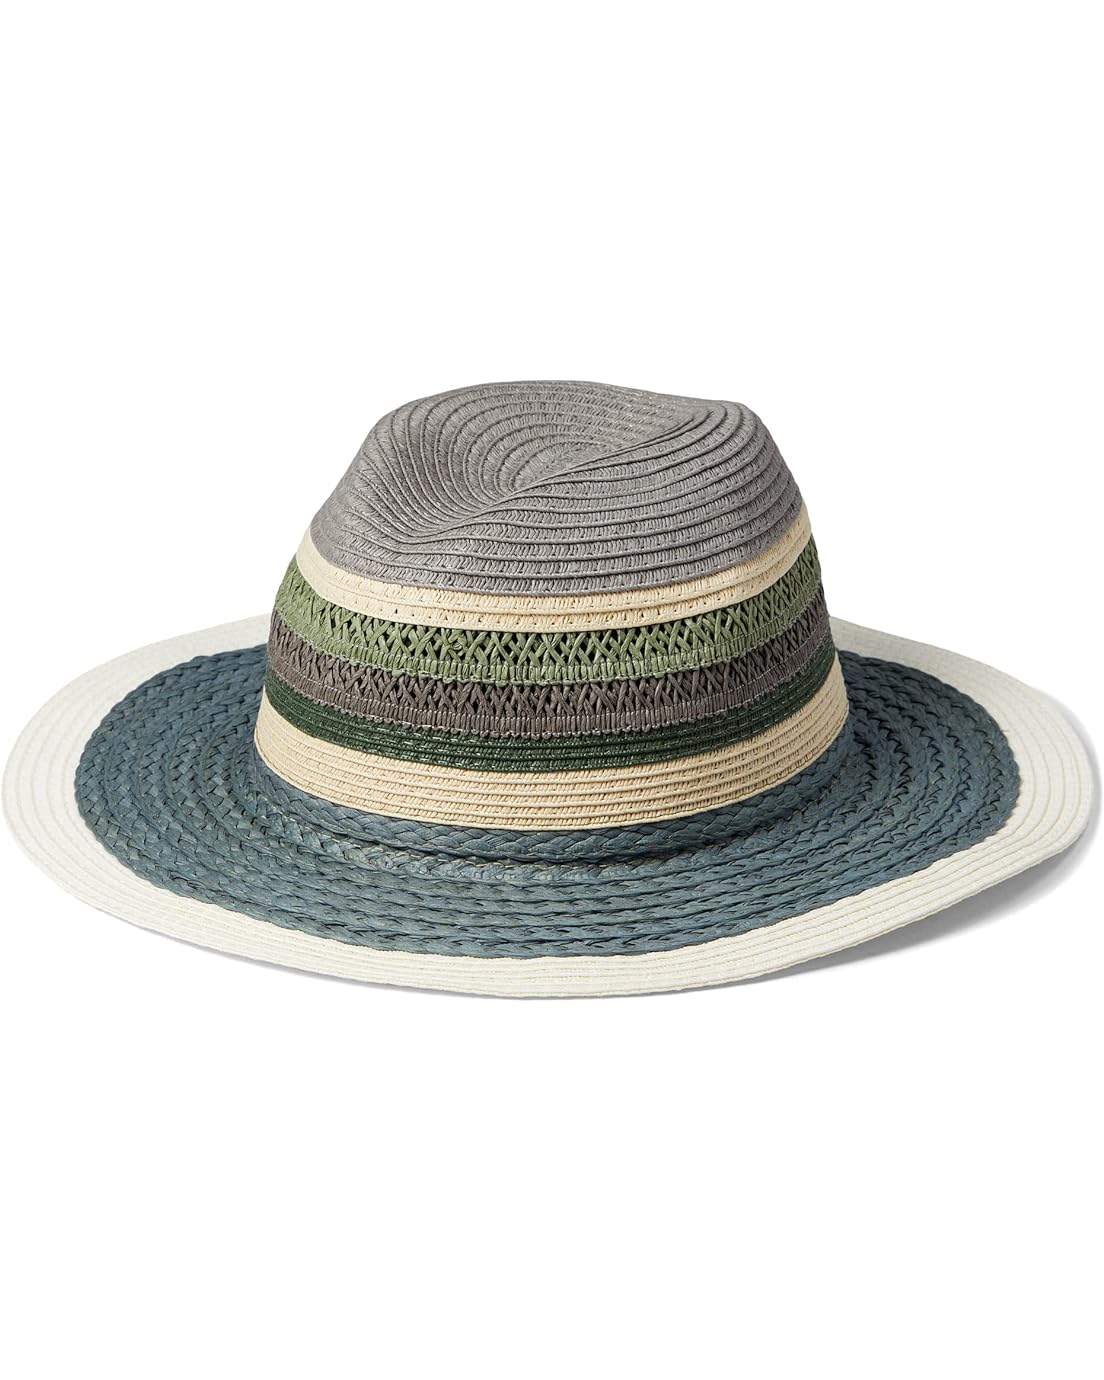  Badgley Mischka Straw Fedora with Open Weave Detail and Contrast Stripes Combo